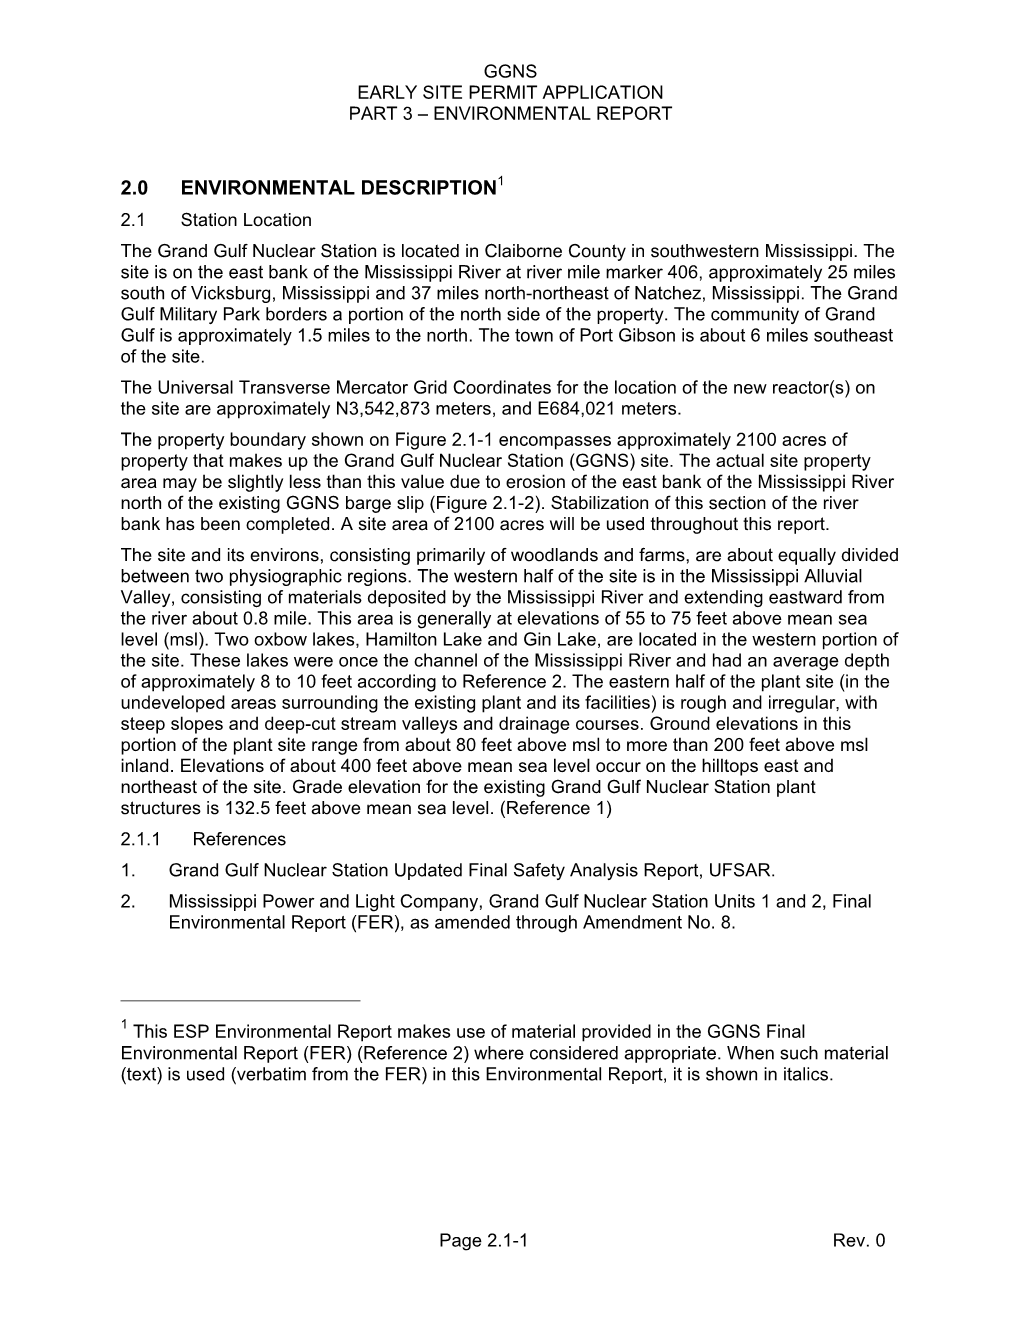 Grand Gulf Early Site Permit Application, Part 3, Chapter 2